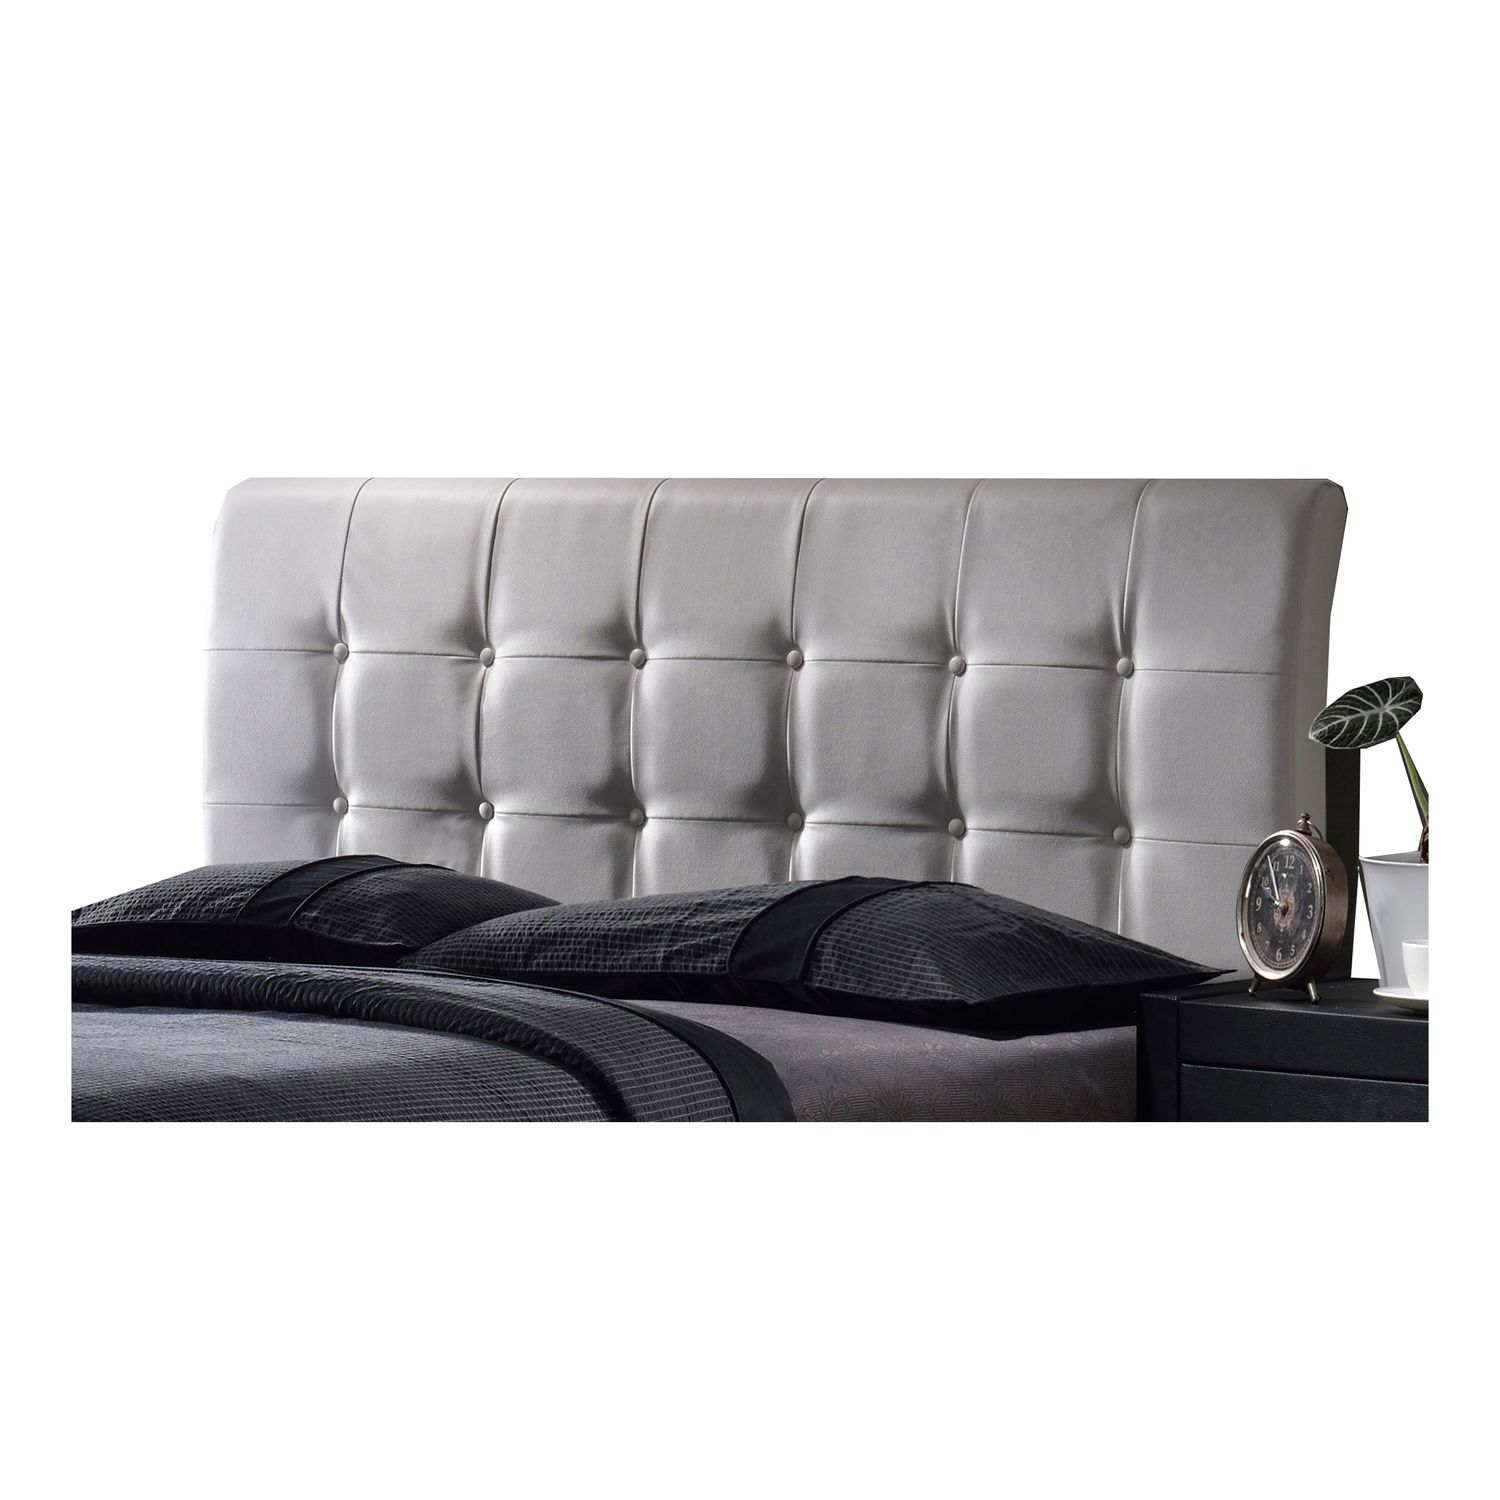 Image for Hillsdale Furniture Lusso Headboard at Kohl's.